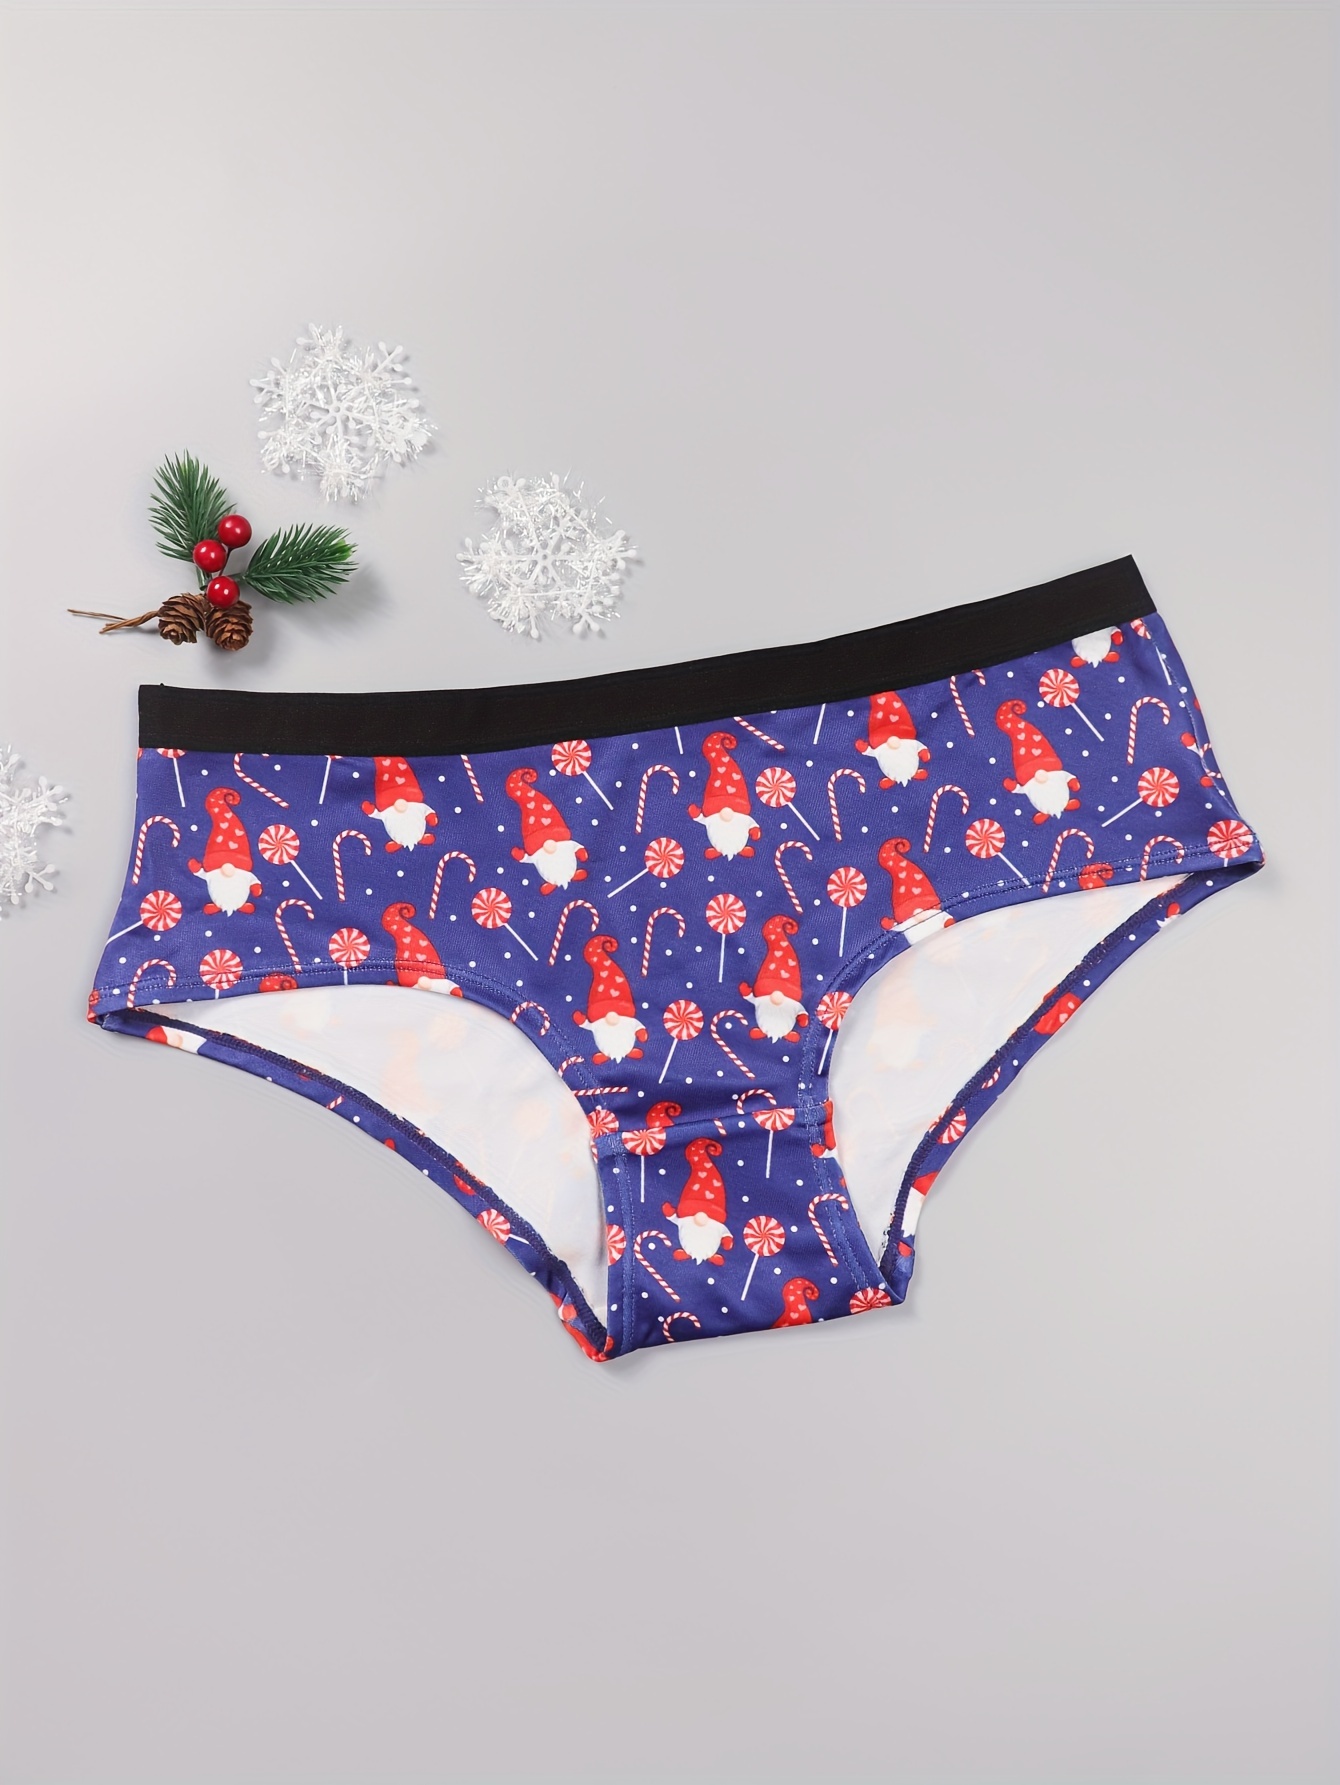 Christmas Underwear, Women's Briefs, Gnome, Black and Red, Best Seller  Underwear, Ladies Panties, Holiday Intimates, Comfy, Cute -  Denmark